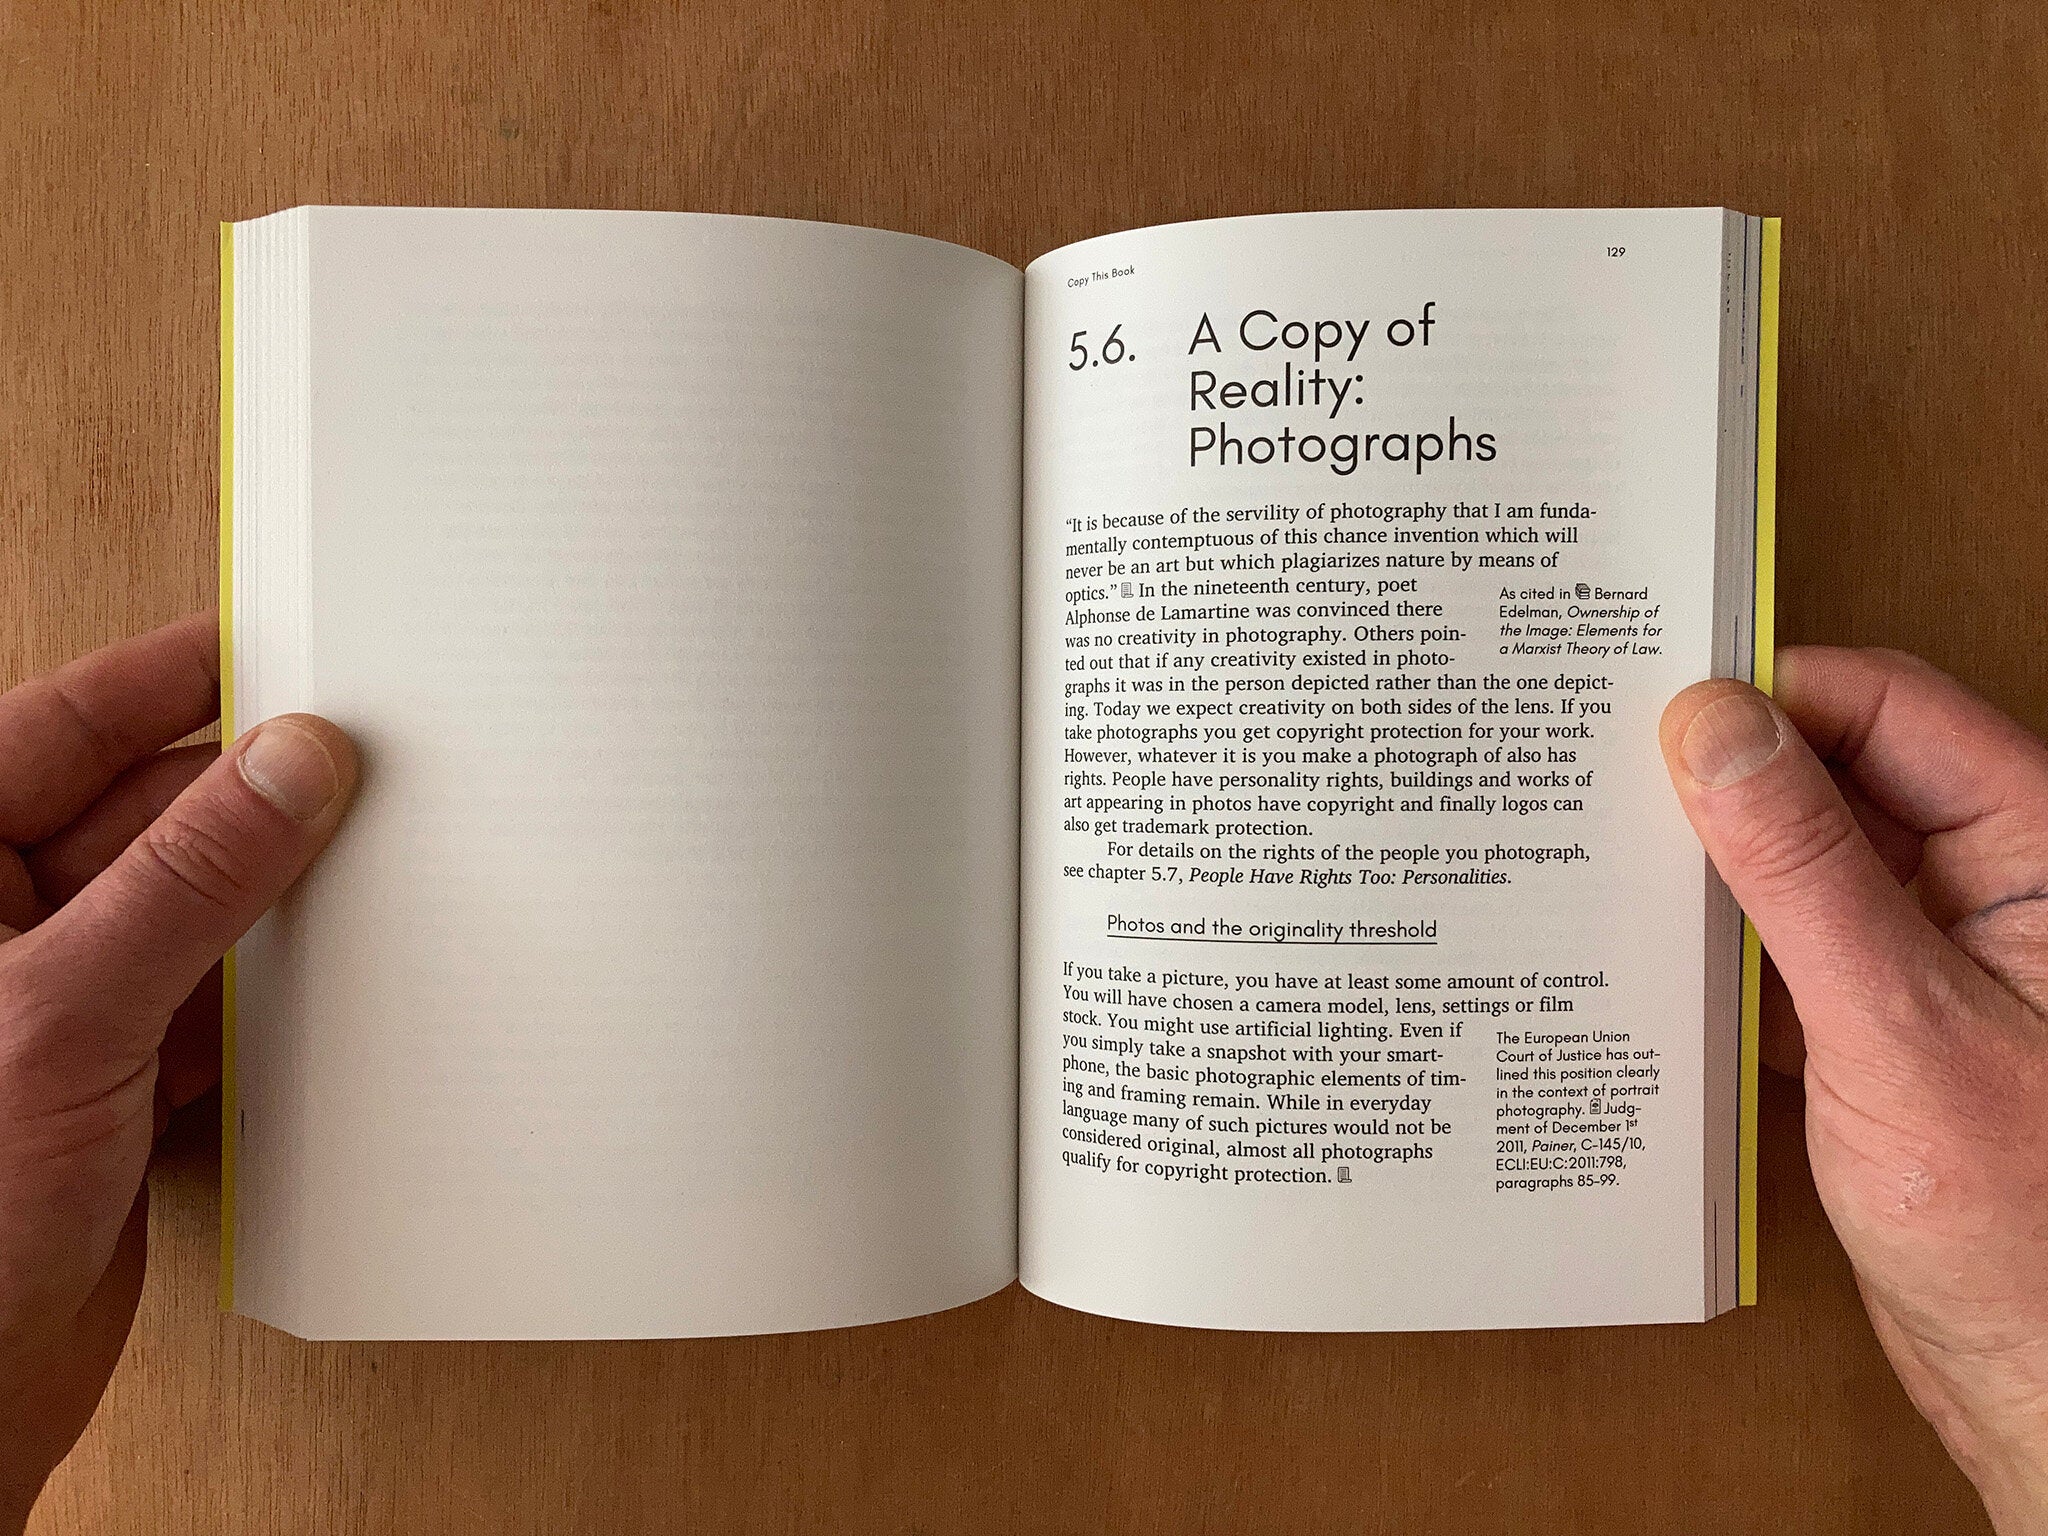 COPY THIS BOOK: AN ARTIST’S GUIDE TO COPYRIGHT by Eric Schrijver